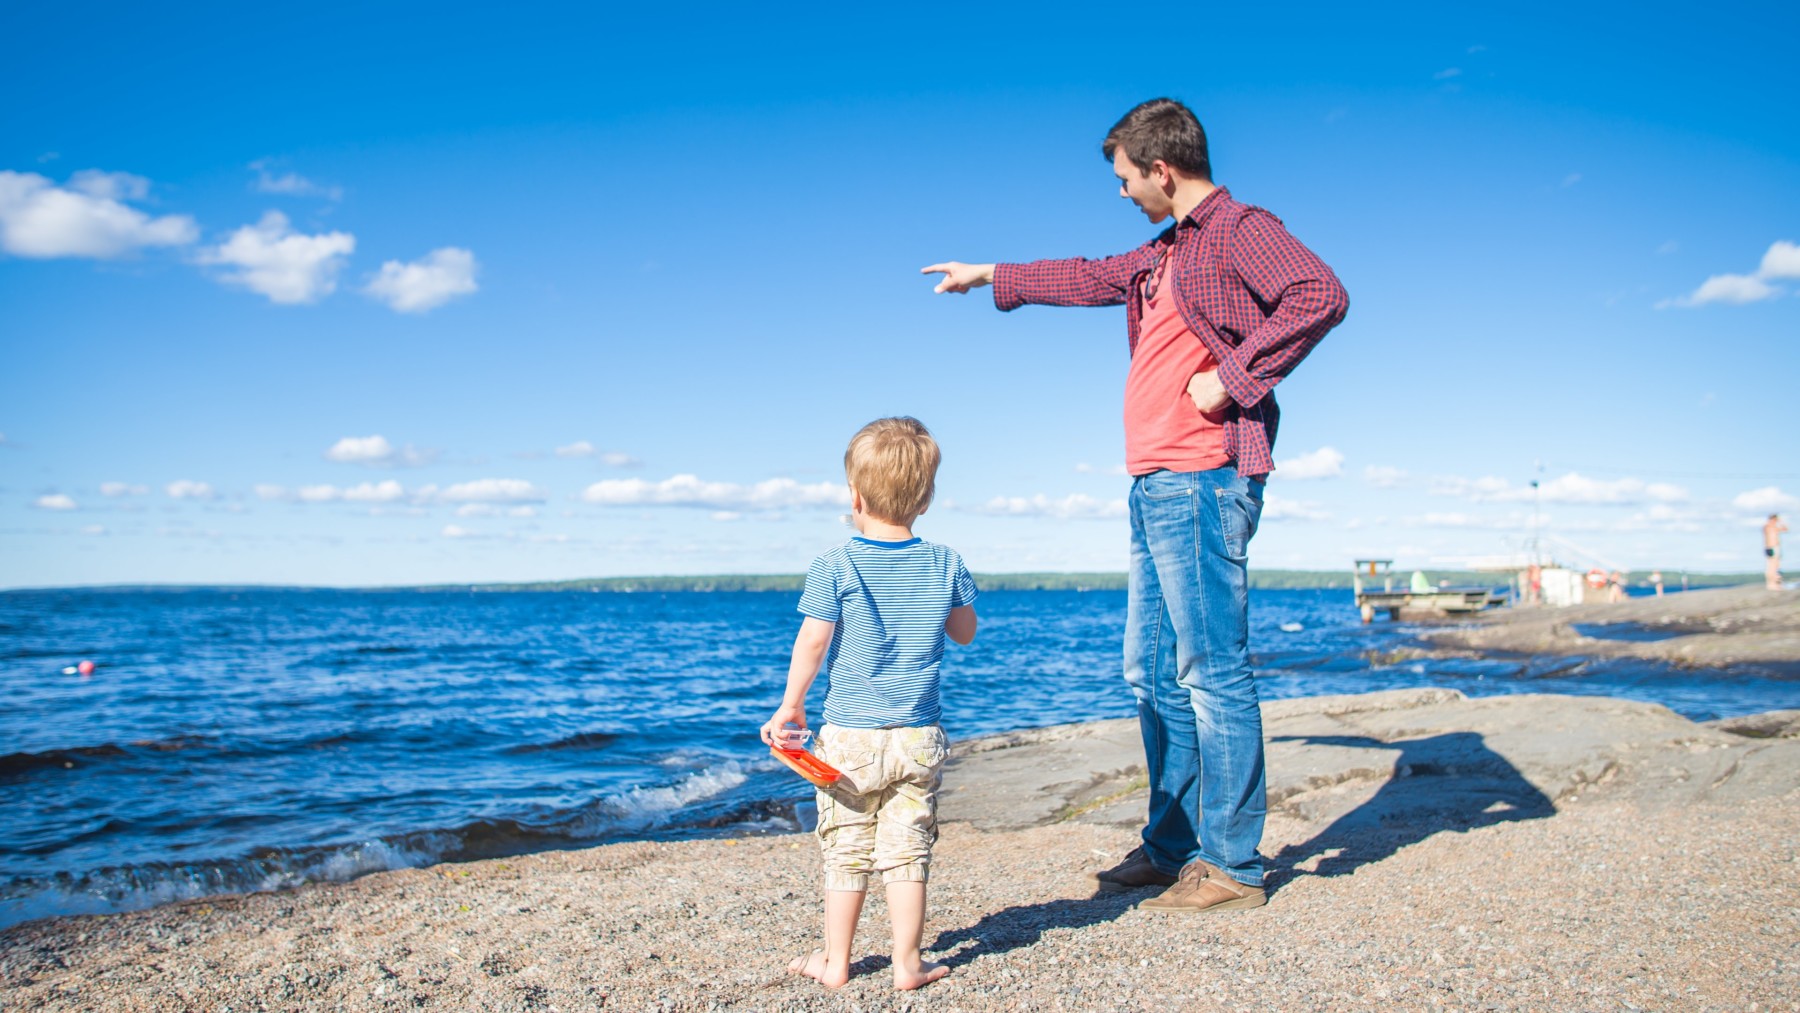 On the shore of a lake, a man points at something on the horizon while a child looks in the same direction.